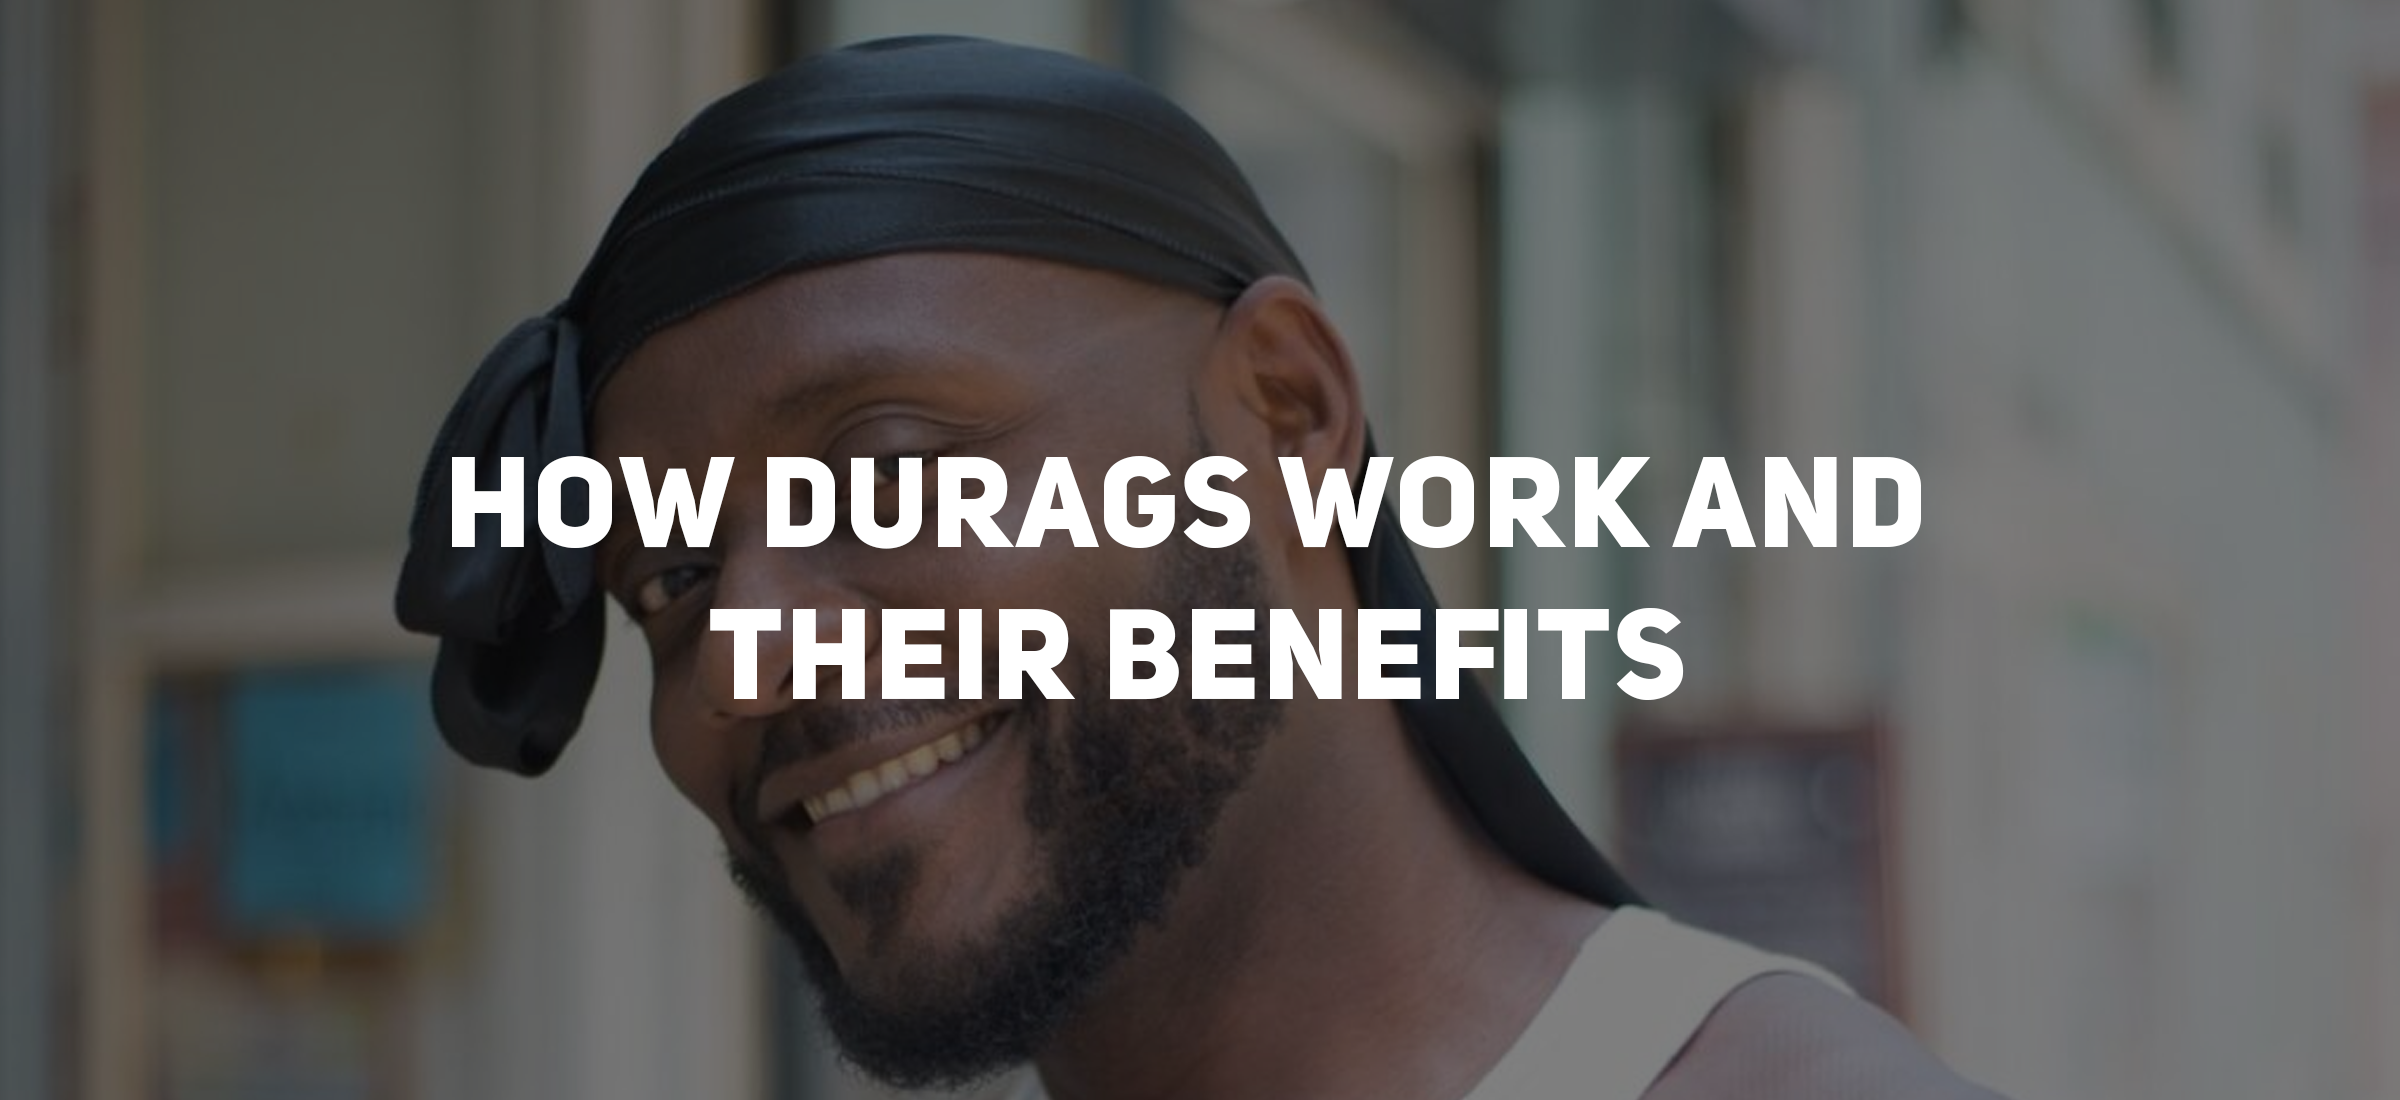 How Durags Work and Their Benefits